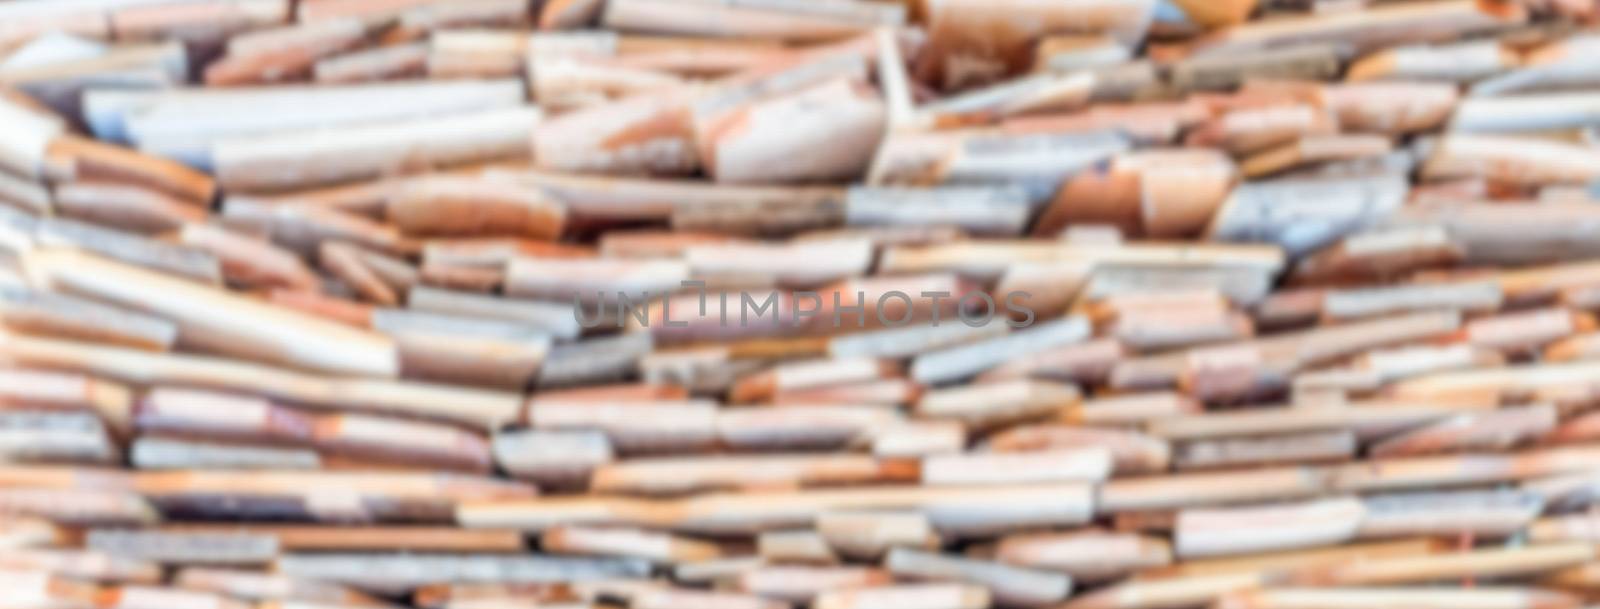 Defocused background with stack of wood by marcorubino